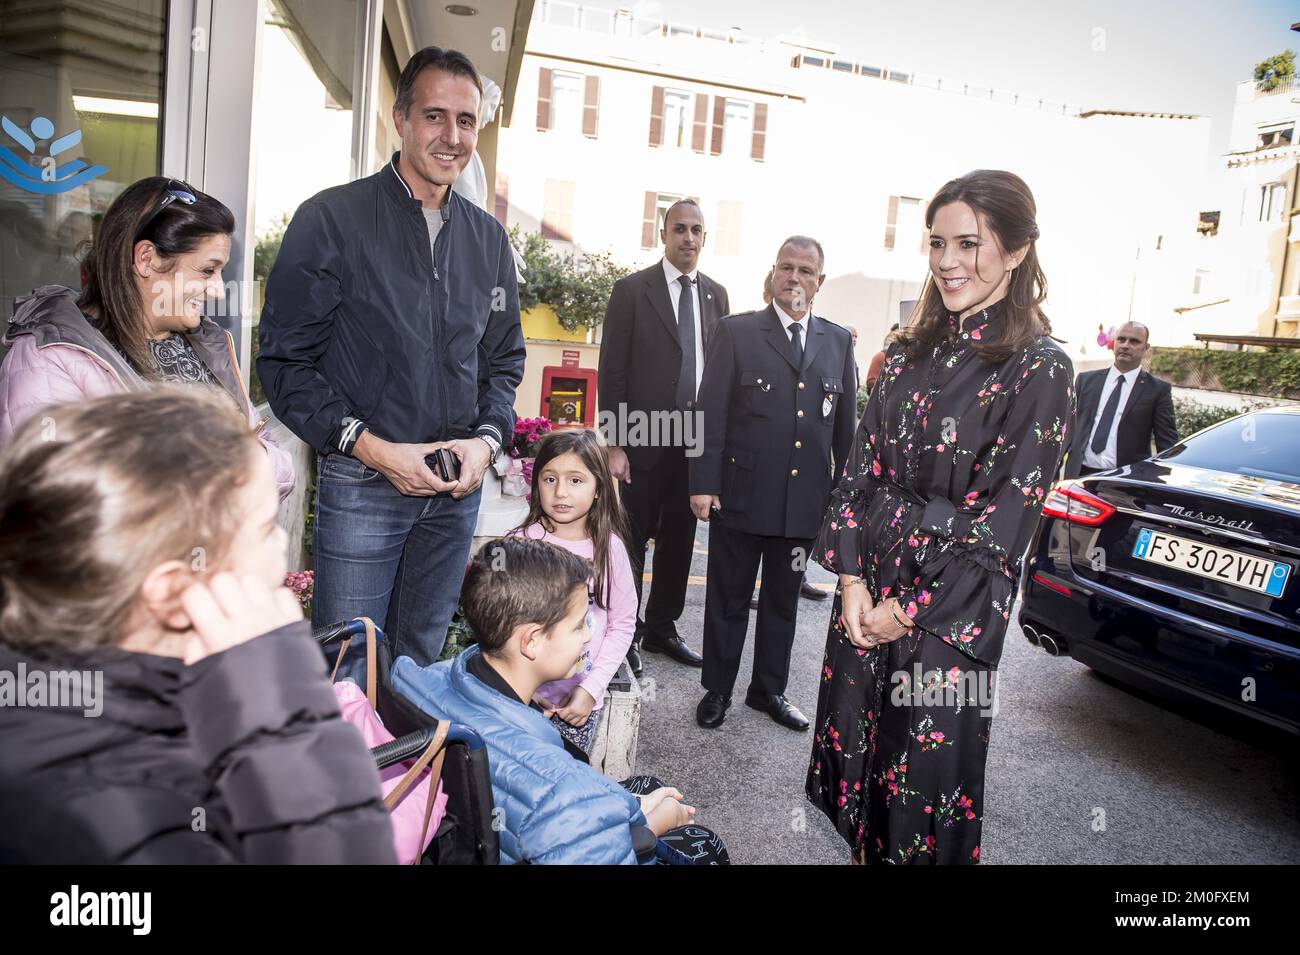 On November 8th 2018 TRH Crown Prince Frederik and Crown Princess Mary visited the Bambino Gesu children's hospital in Rome. Crown Princess Mary met with patients and tased to staff. The visit is part of the business delegation tour of Rome from November 6th to 8th. Stock Photo